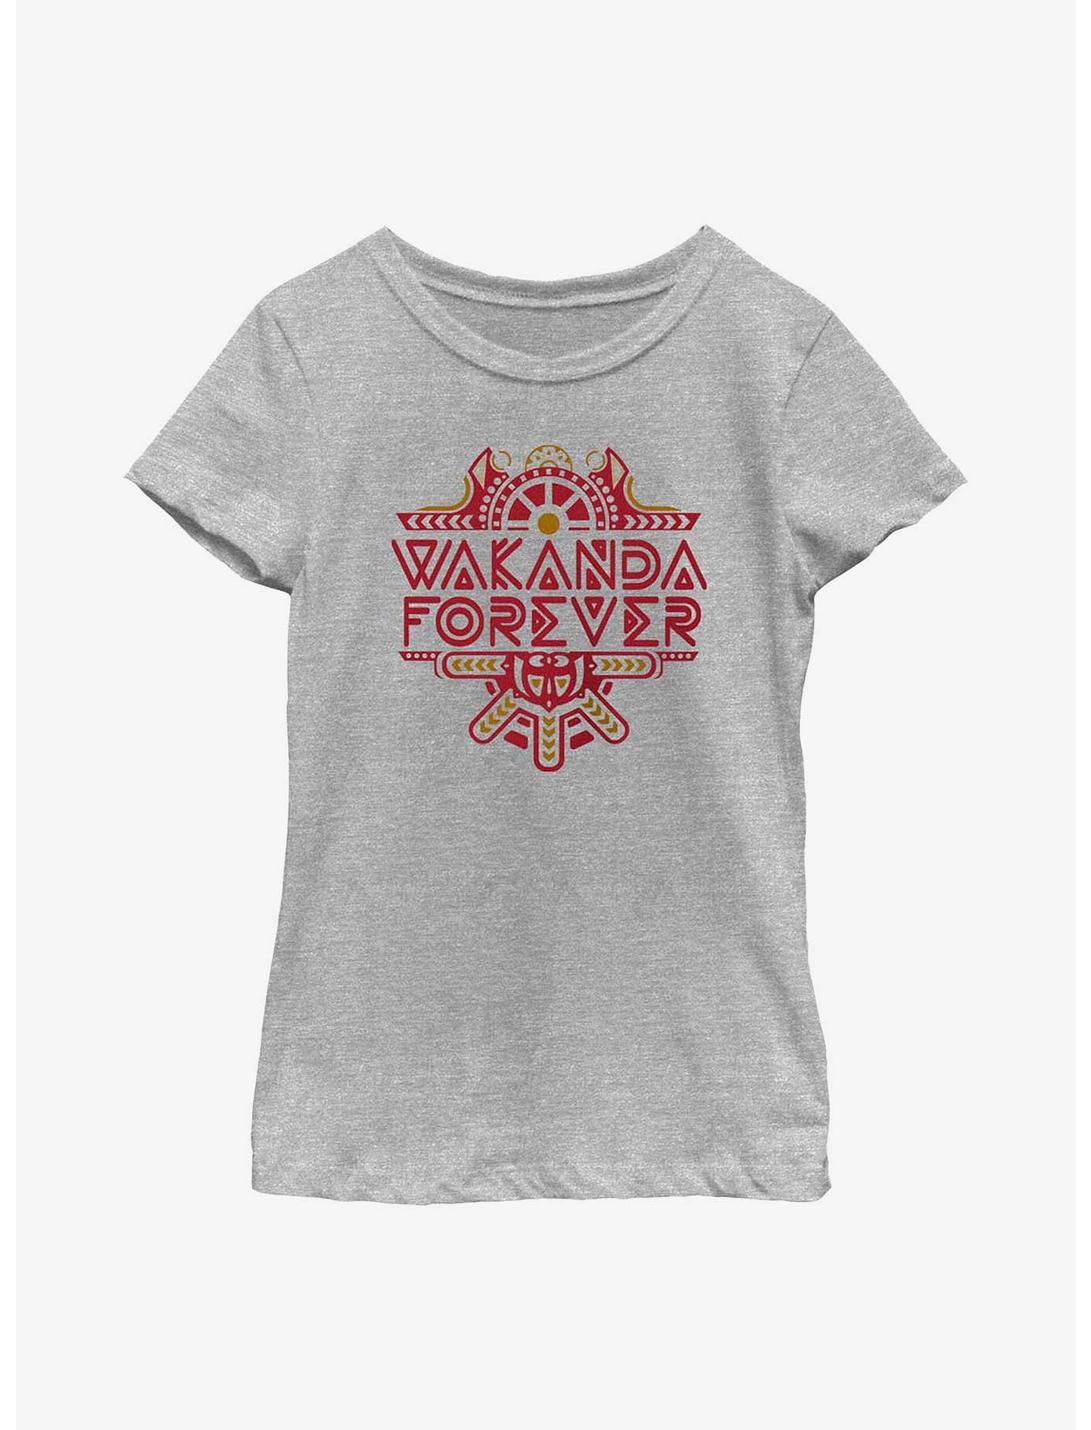 Marvel Black Panther: Wakanda Forever Intricate Logo Youth Girls T-Shirt, ATH HTR, hi-res